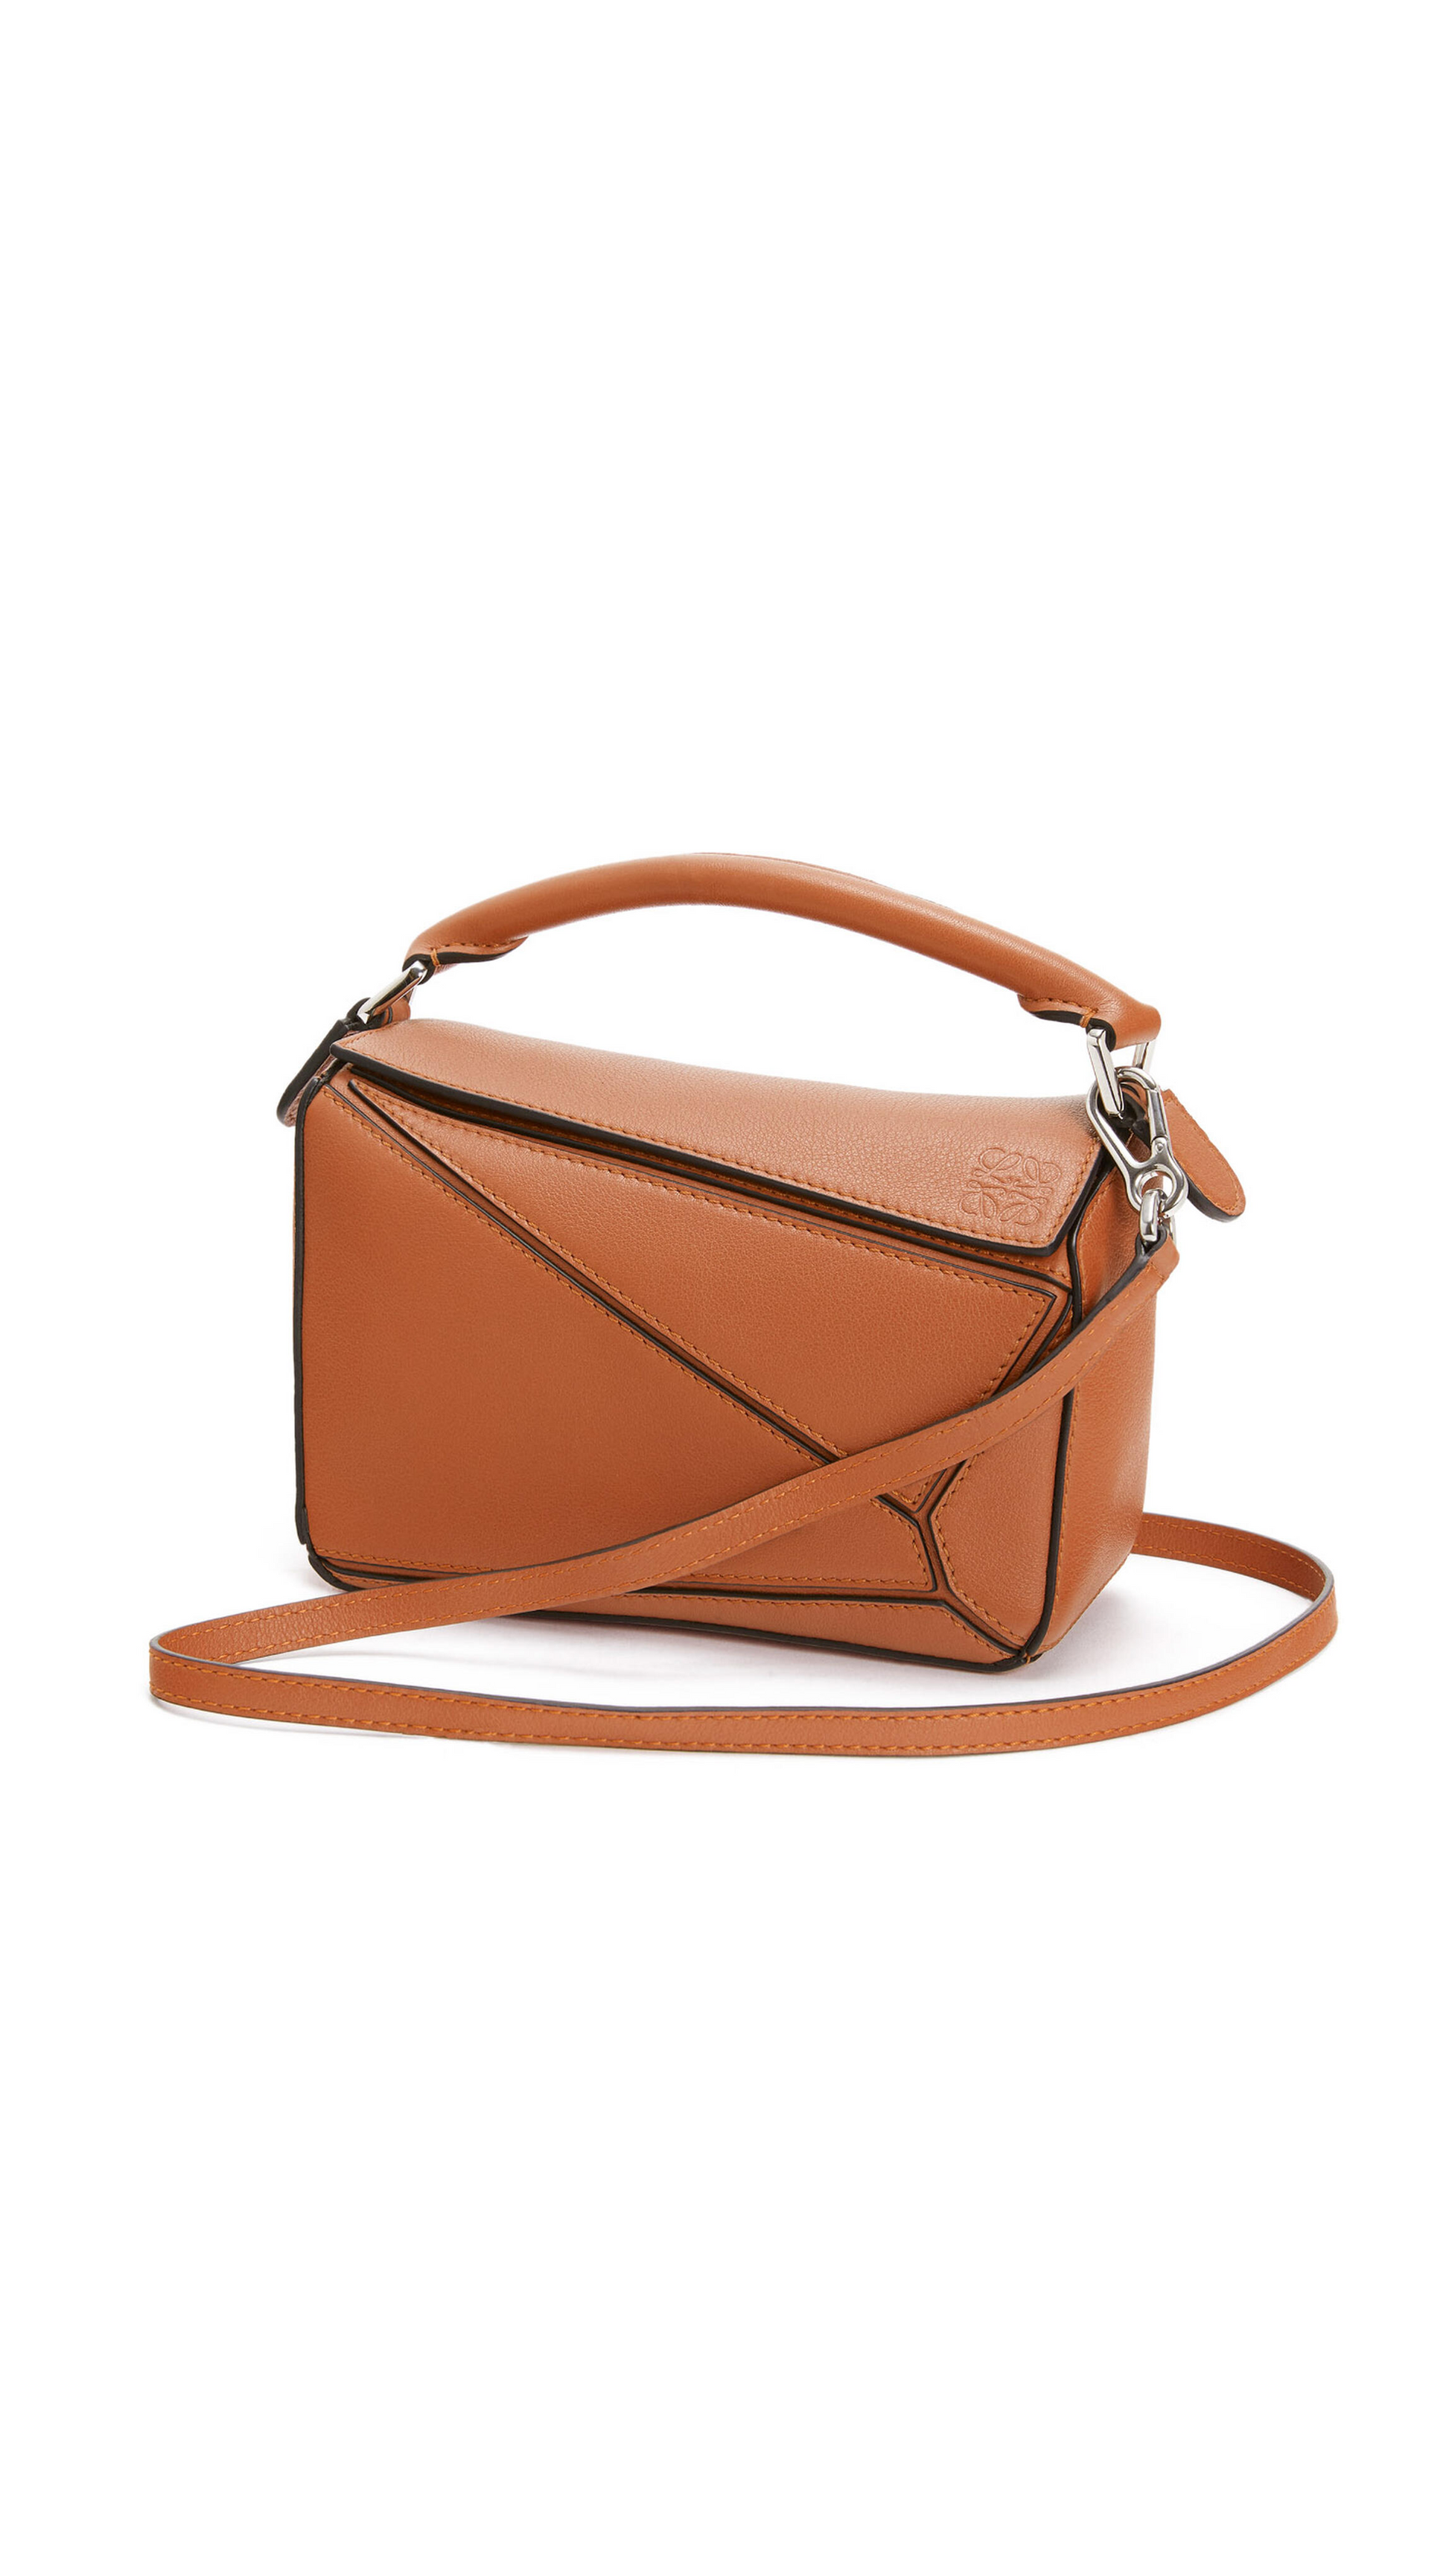 Small Puzzle bag in classic calfskin